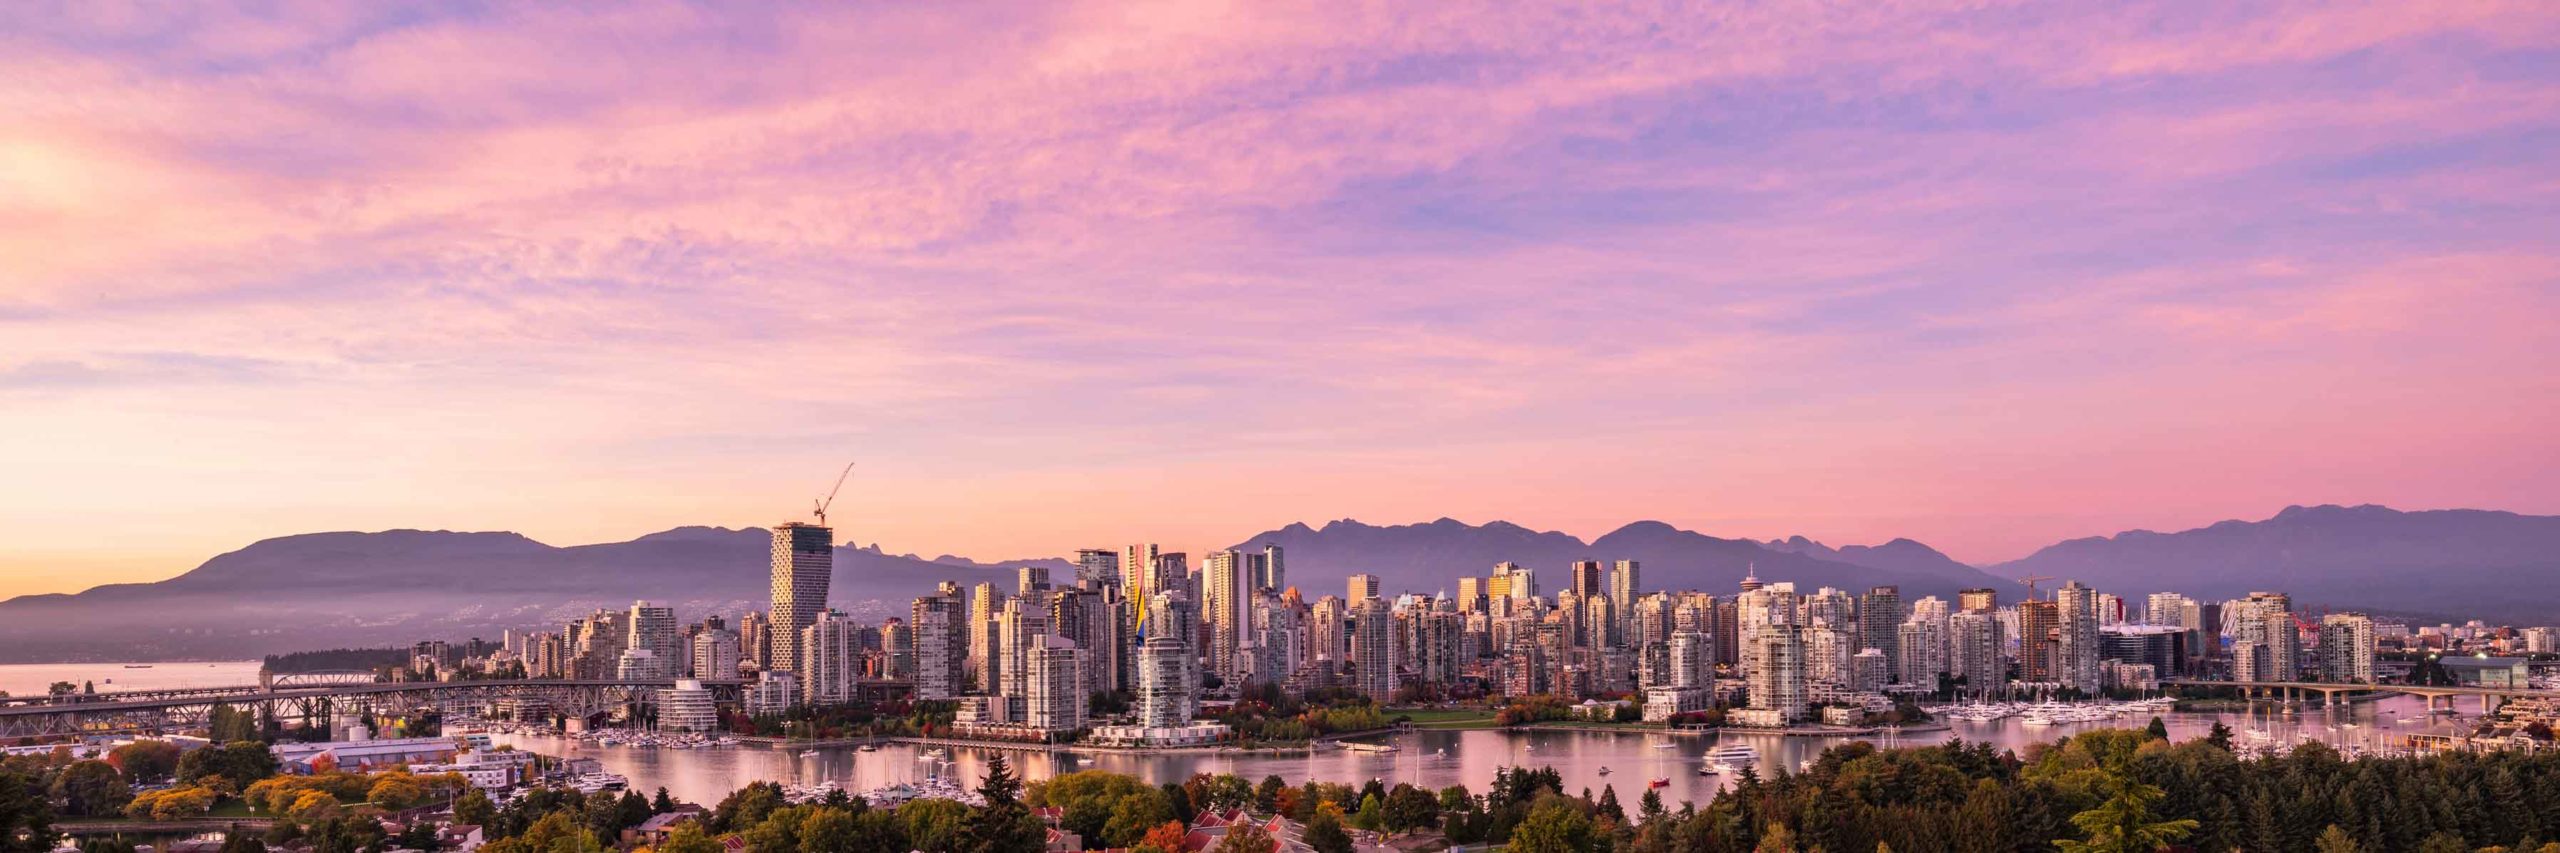 Urban, Oceanic & Mountainous: Vancouver Vacations in a Nutshell